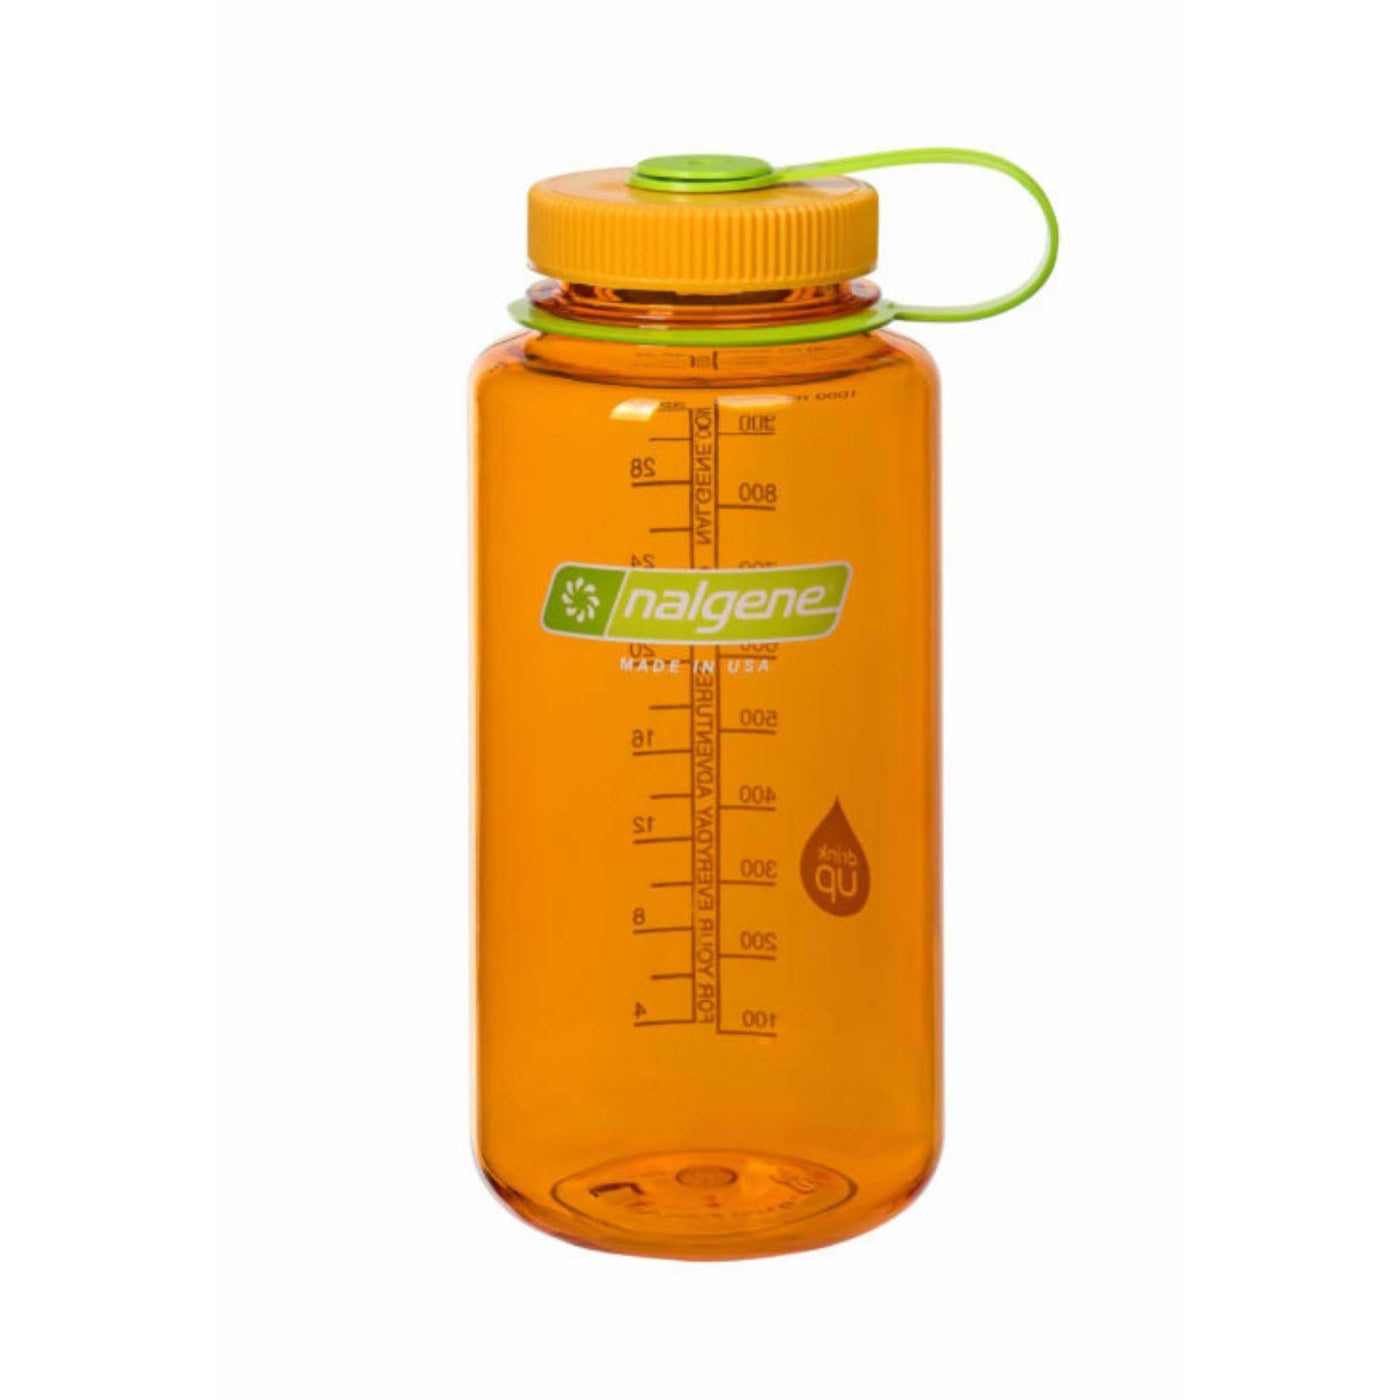 Nalgene Sustain Wide Mouth Bottle 1L | Hiking Water Bottles and Flasks | Further Faster Christchurch NZ #nalgene-clementine